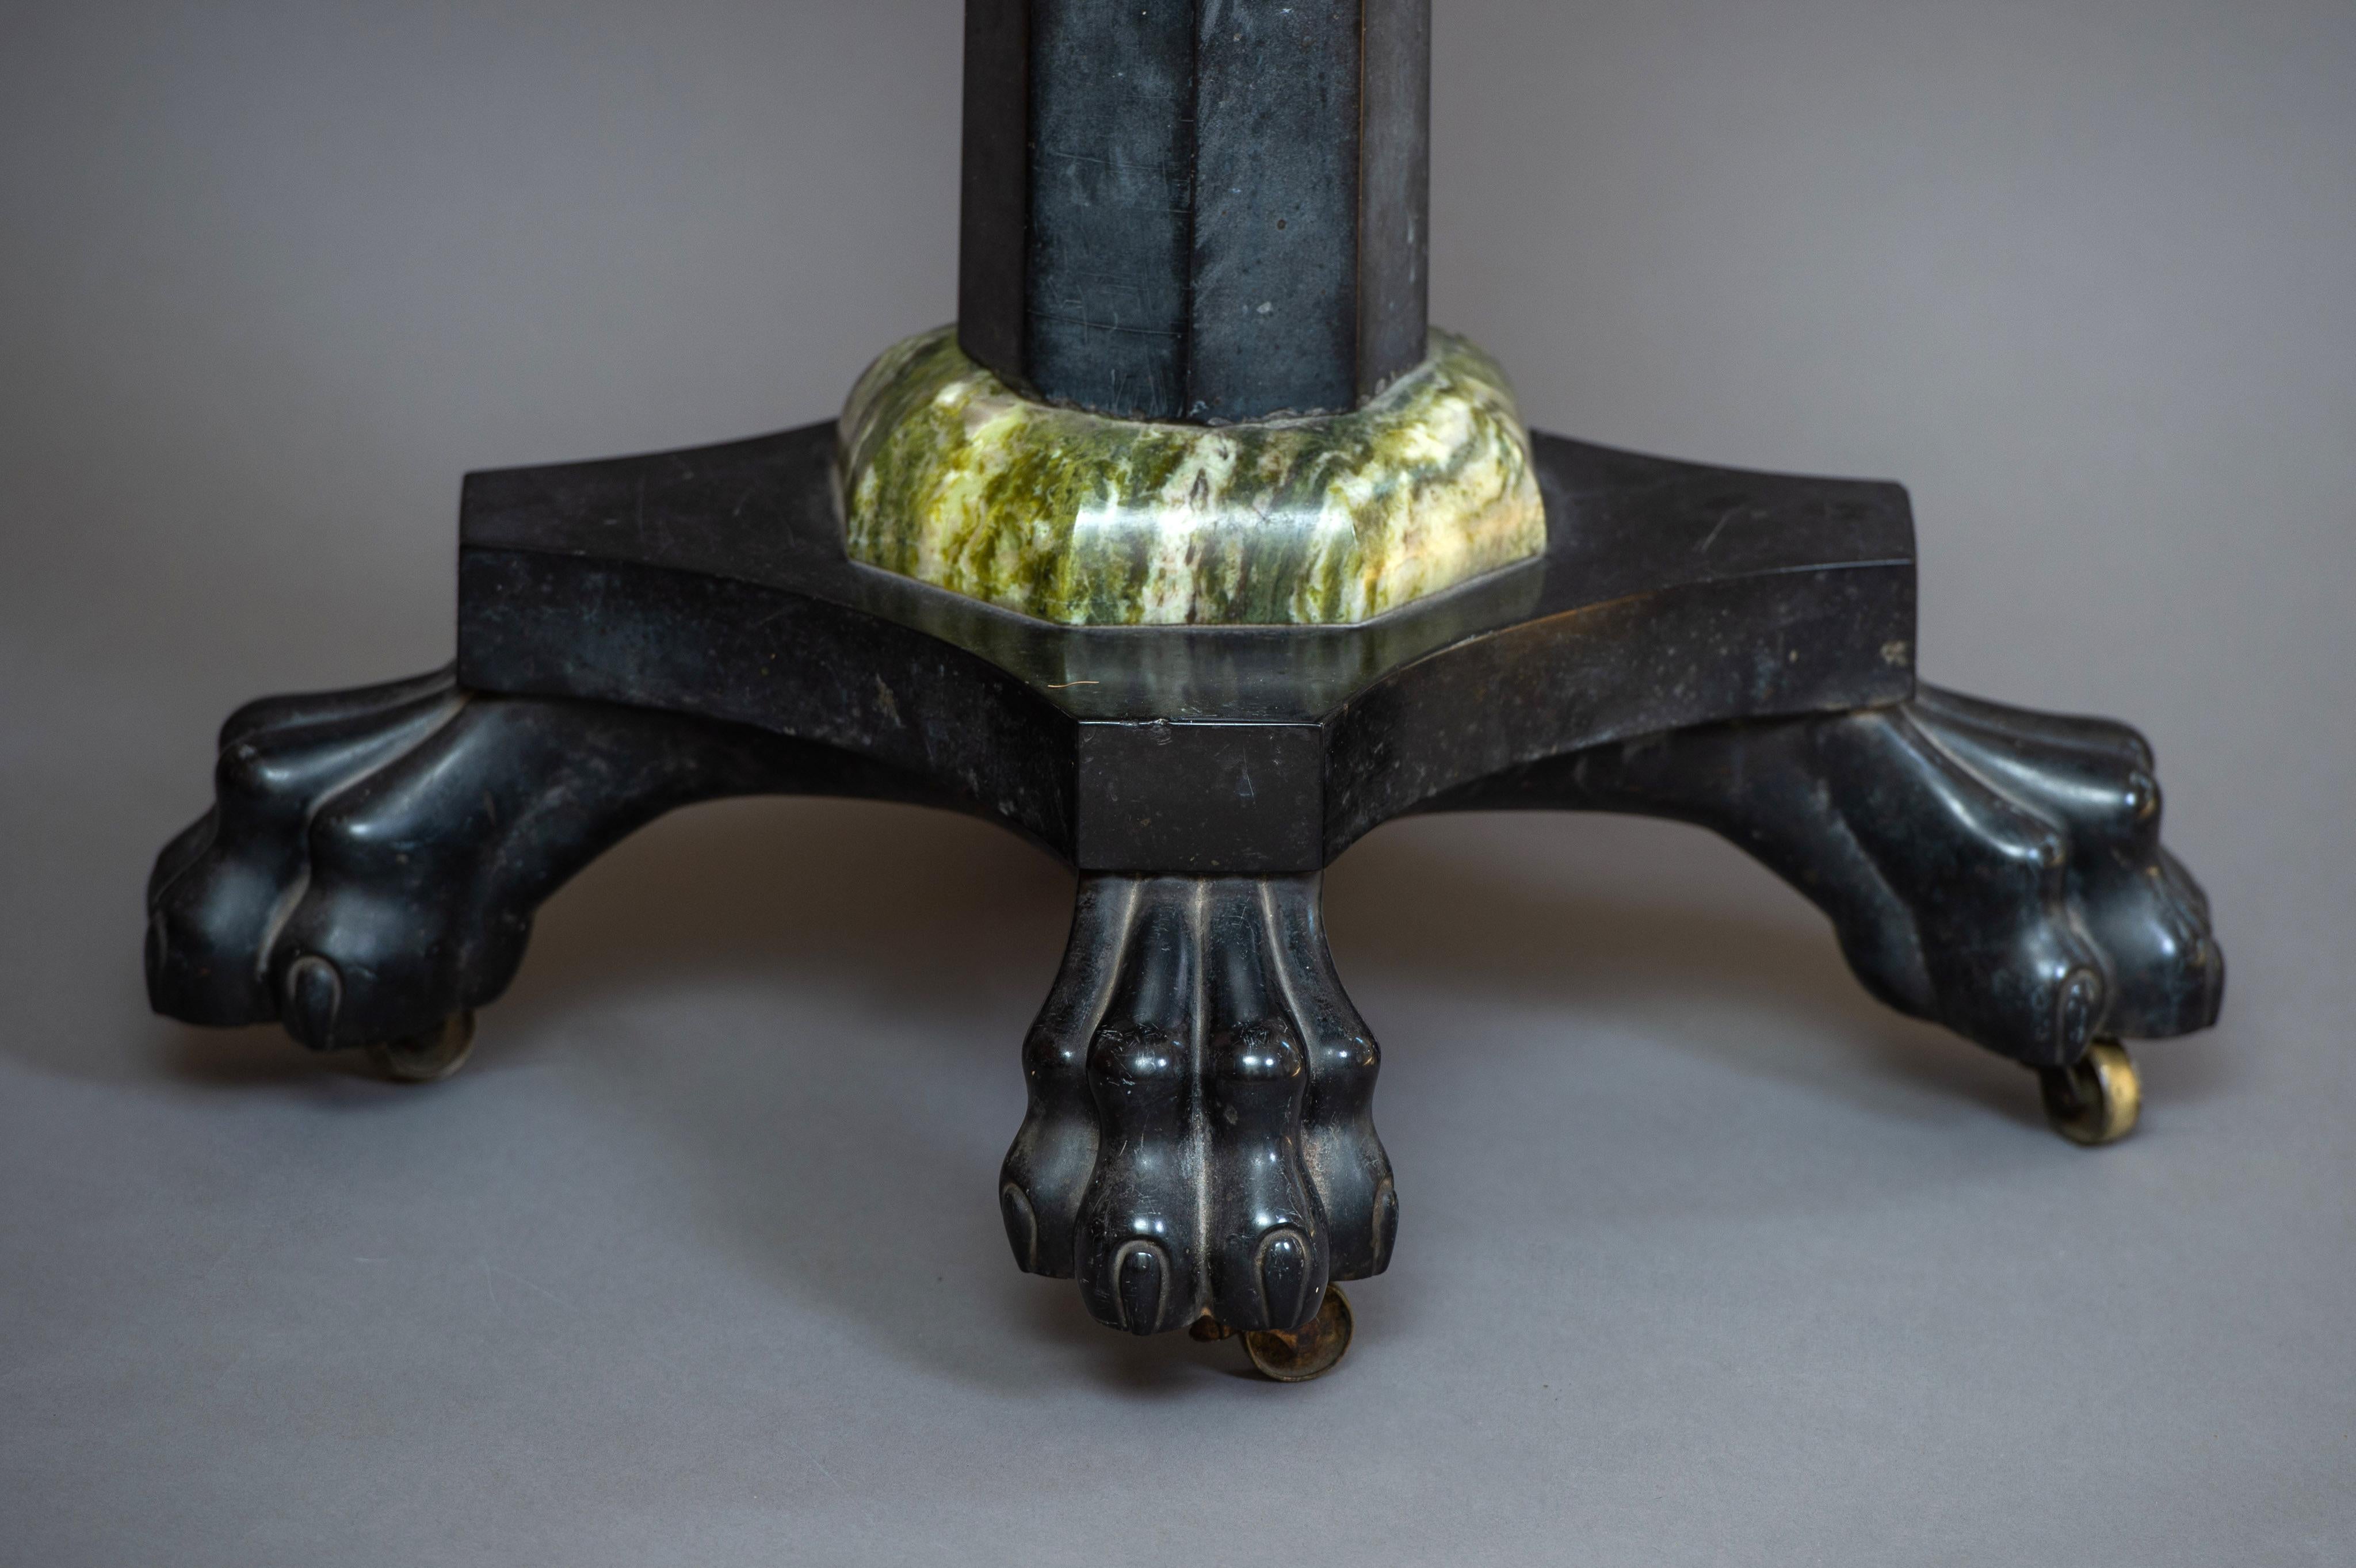 The beautifully figured oval Connemara top is supported on a tapering octagonal column of Kilkenny black marble leading to a quadripartite platform incorporating four carved claw feet on brass castors. The column has finely shaped collars top and